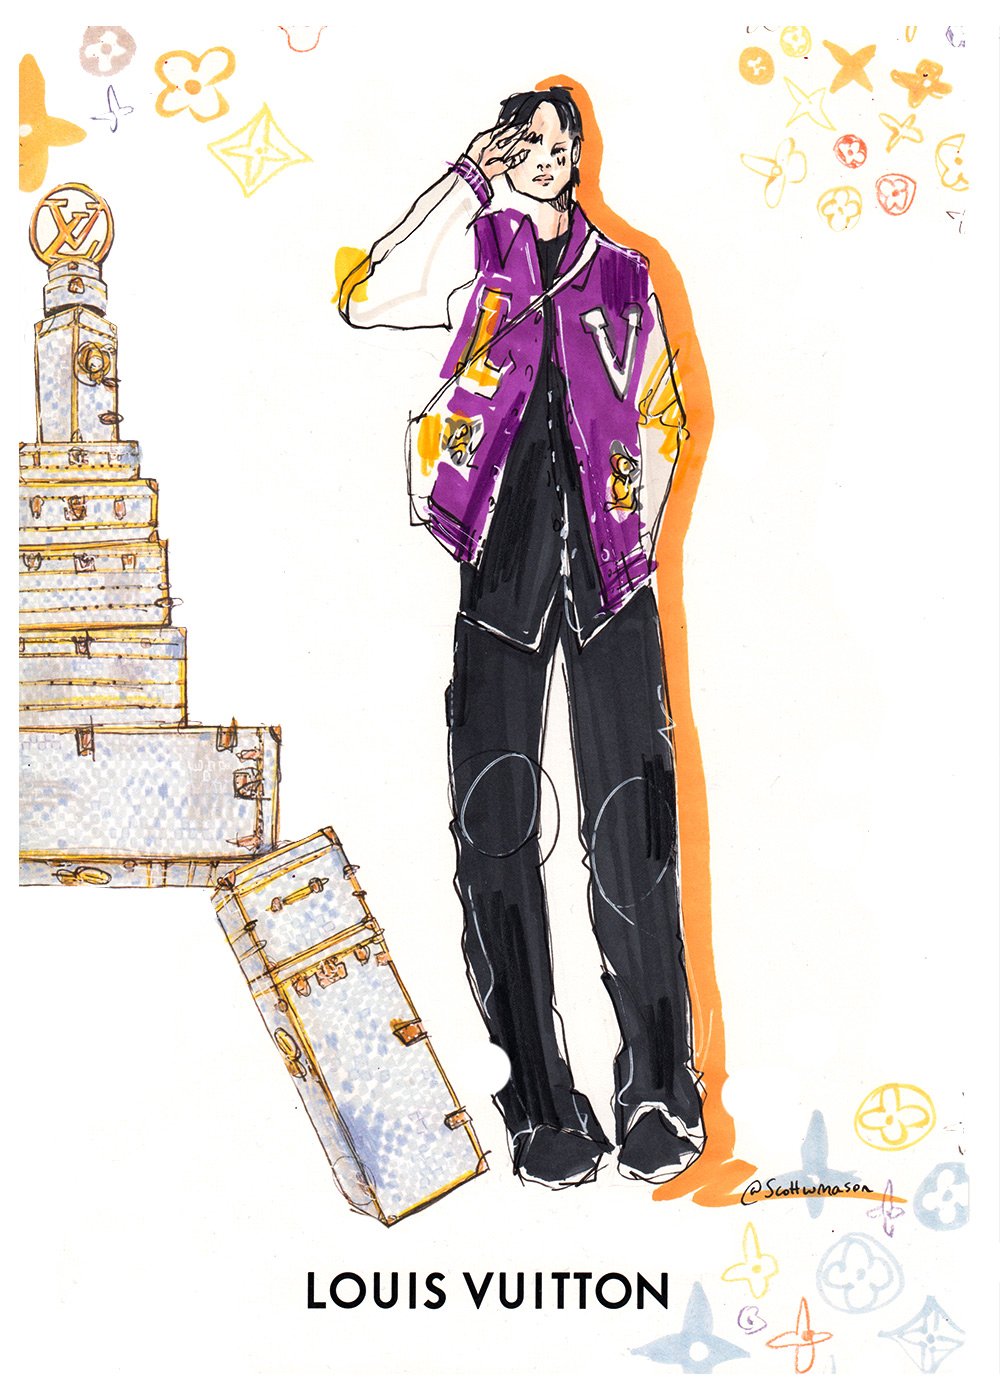 Luxury-Louis-Vuitton-Instore-Event-Drawing.jpg